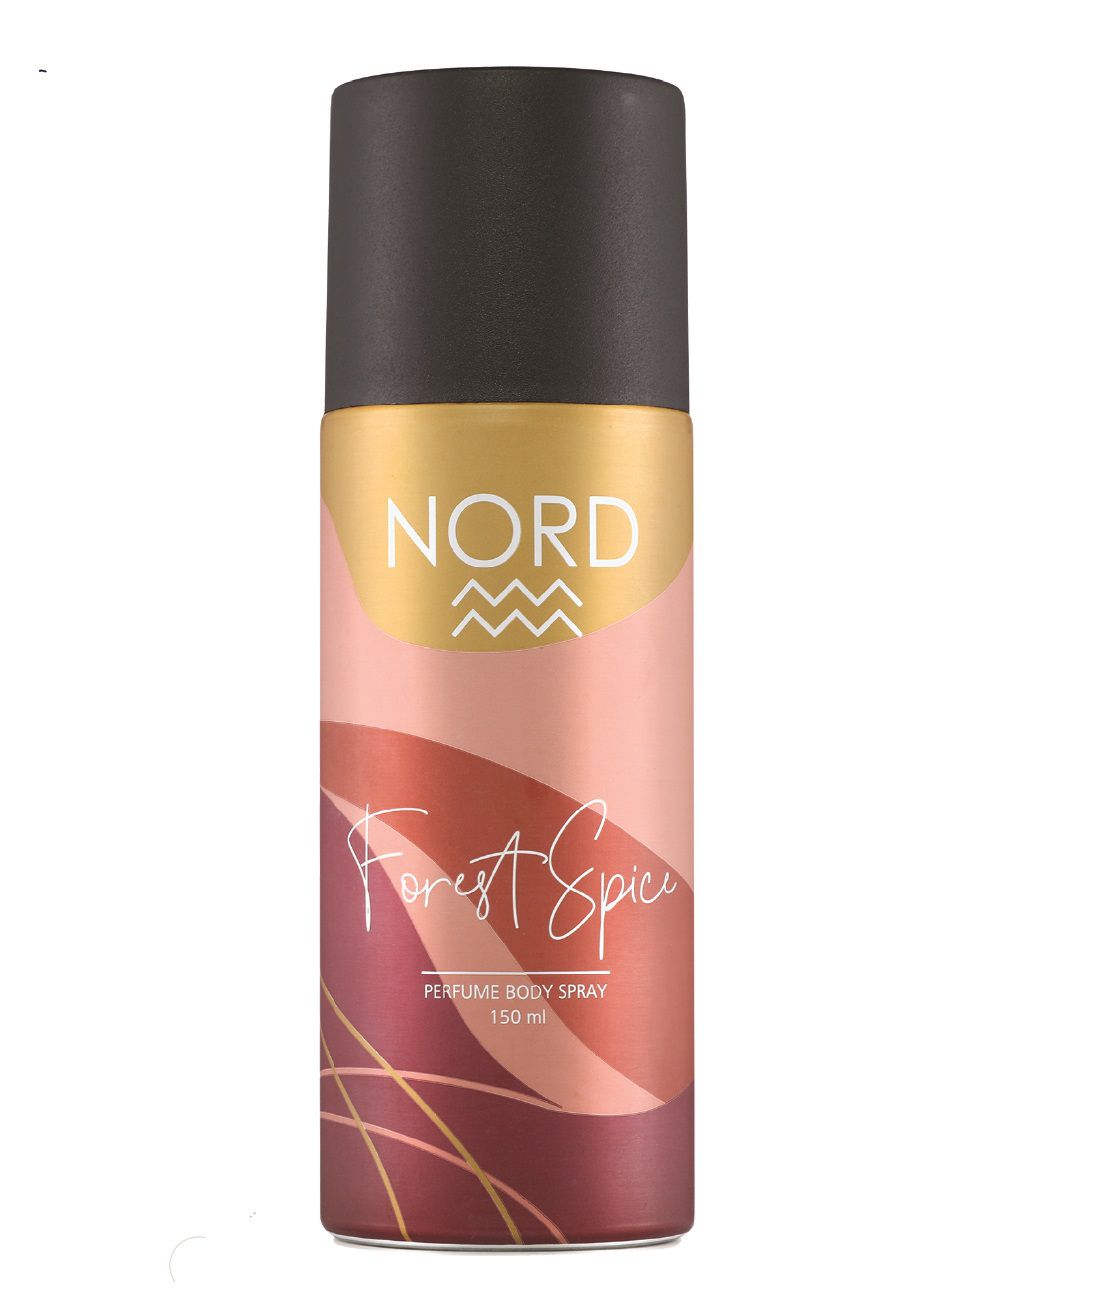     			NORD - Forest Spice Deodorant Spray for Men 150 ml ( Pack of 1 )